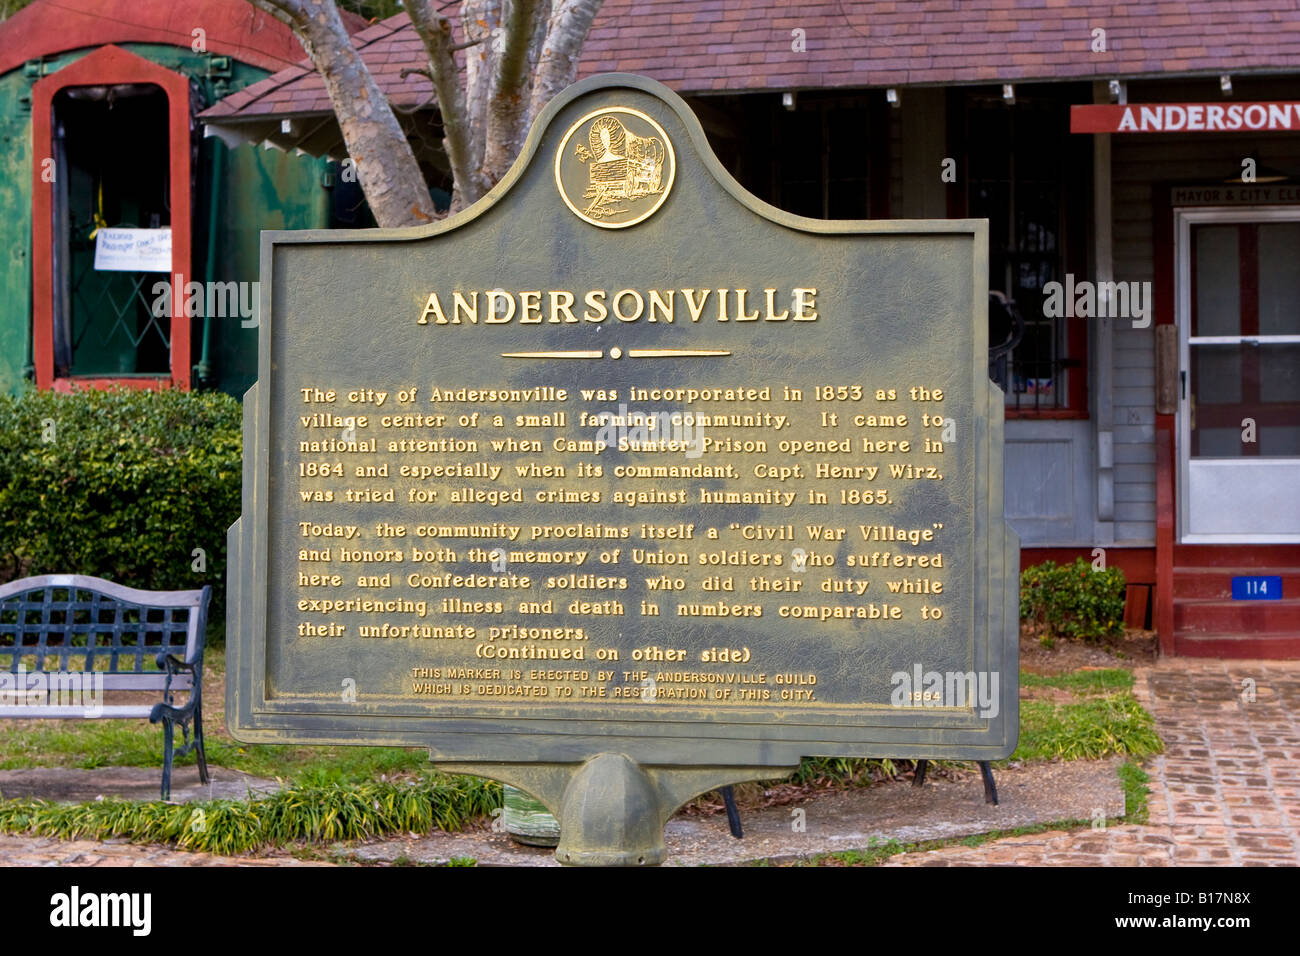 Andersonville American Civil War Exhibit, Museum and Historical Site Stock Photo